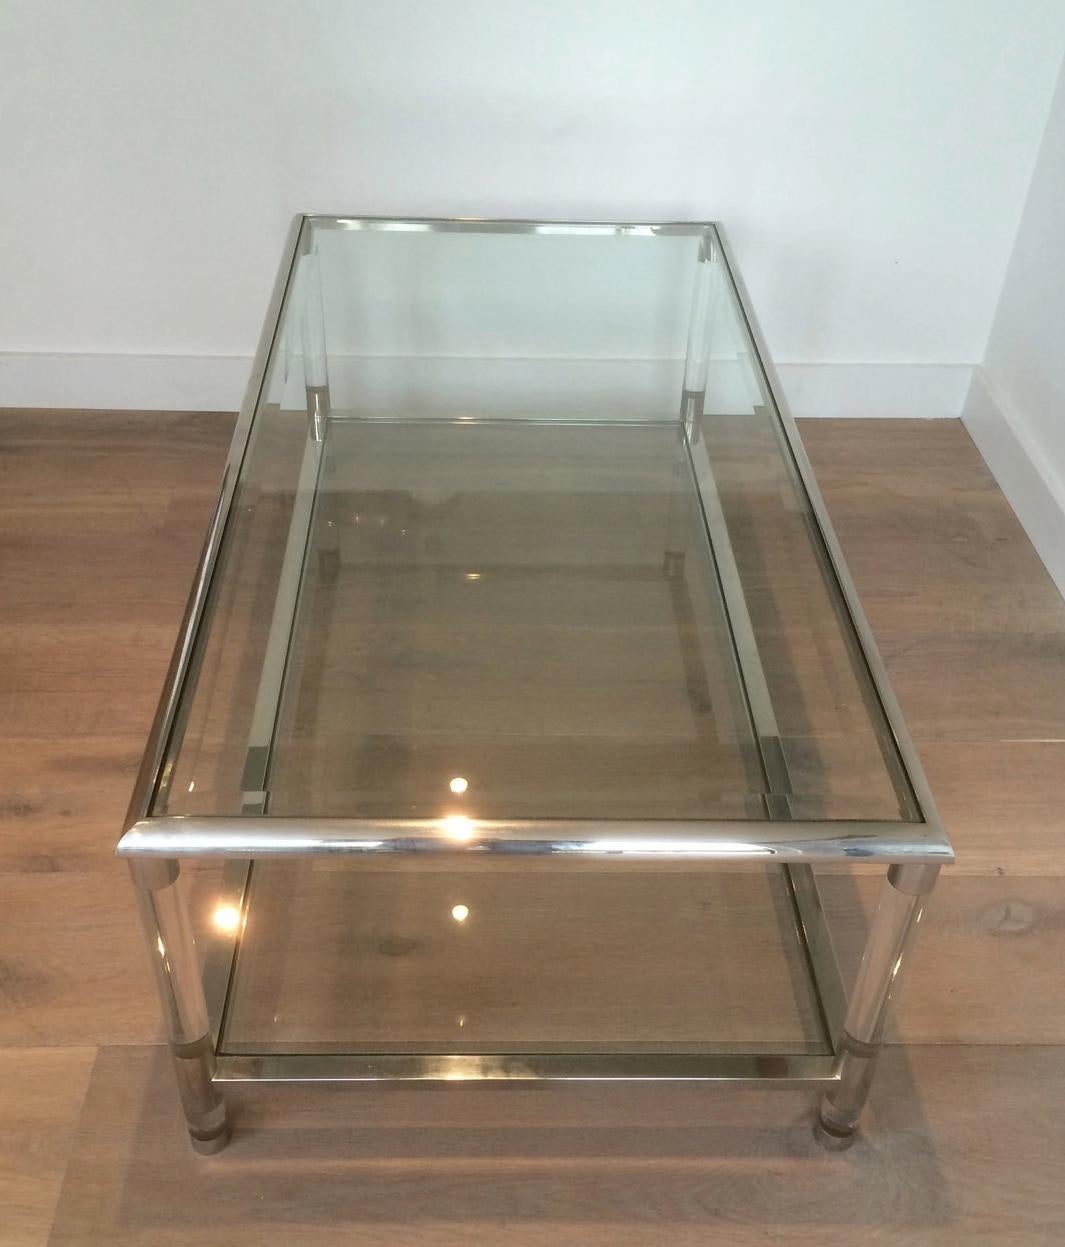 This large coffee table is made of chrome and Lucite with two glass shelves, beveled on top glass. This is a French design, circa 1970.